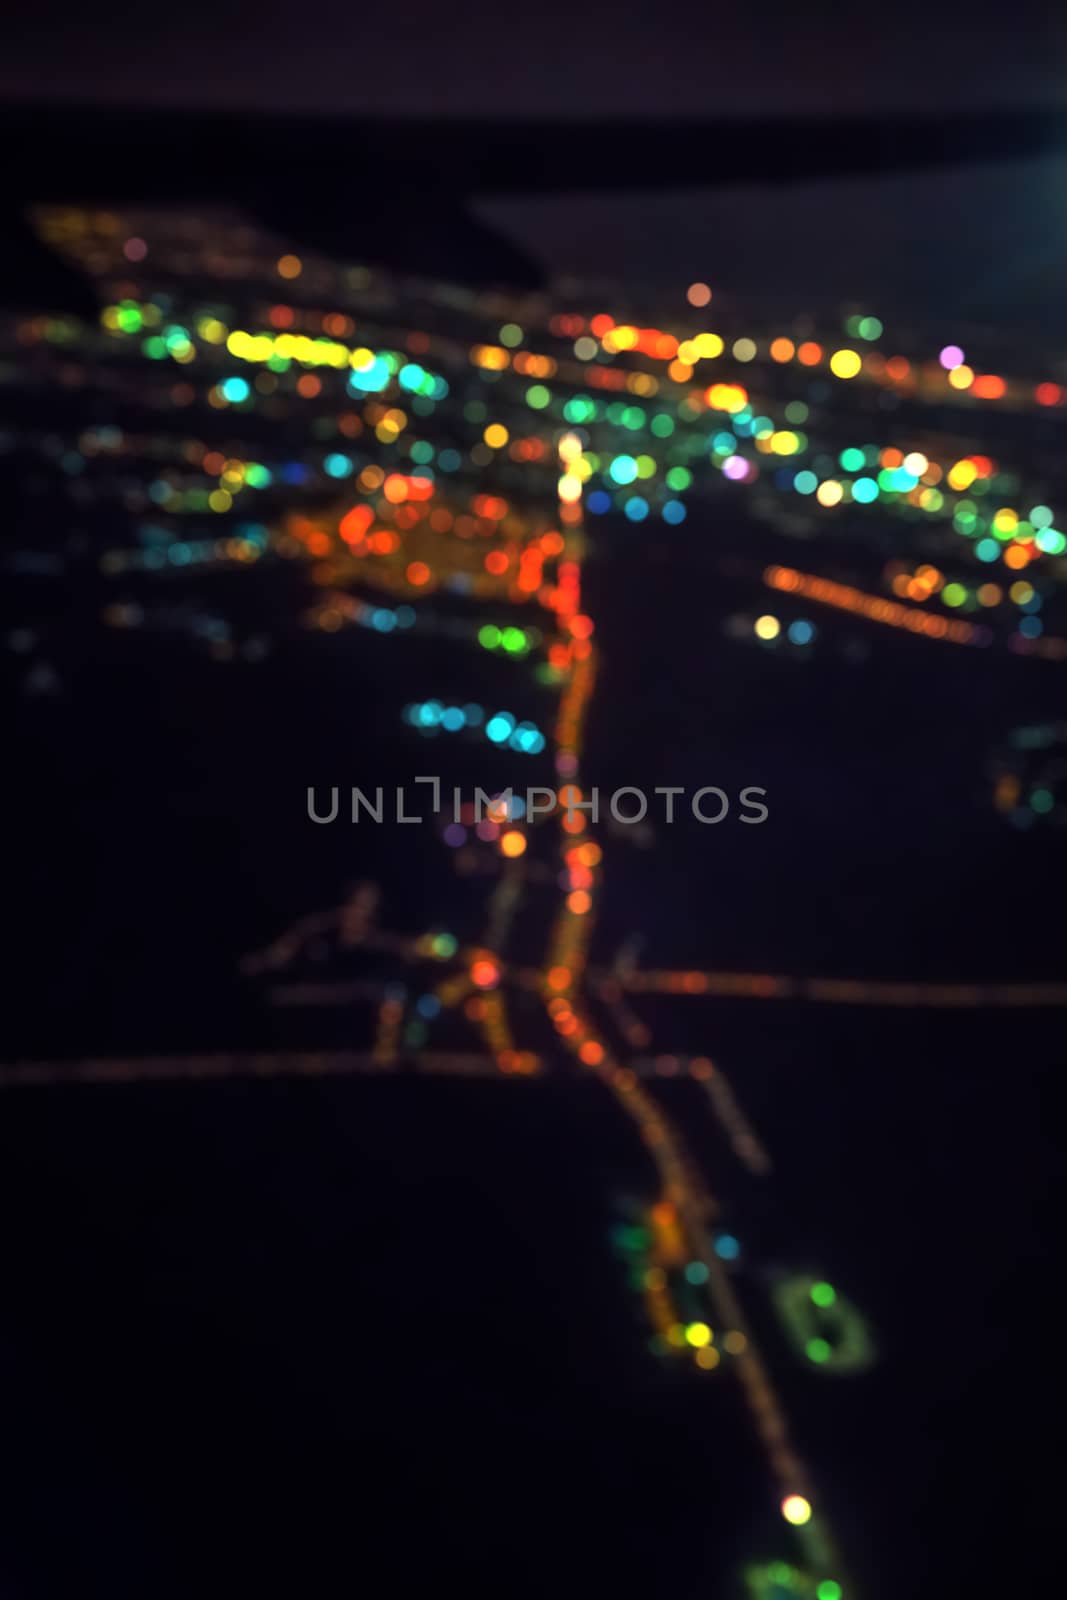 Dark background view of city with lights from aeroplane. Night lights in the city. by bonilook